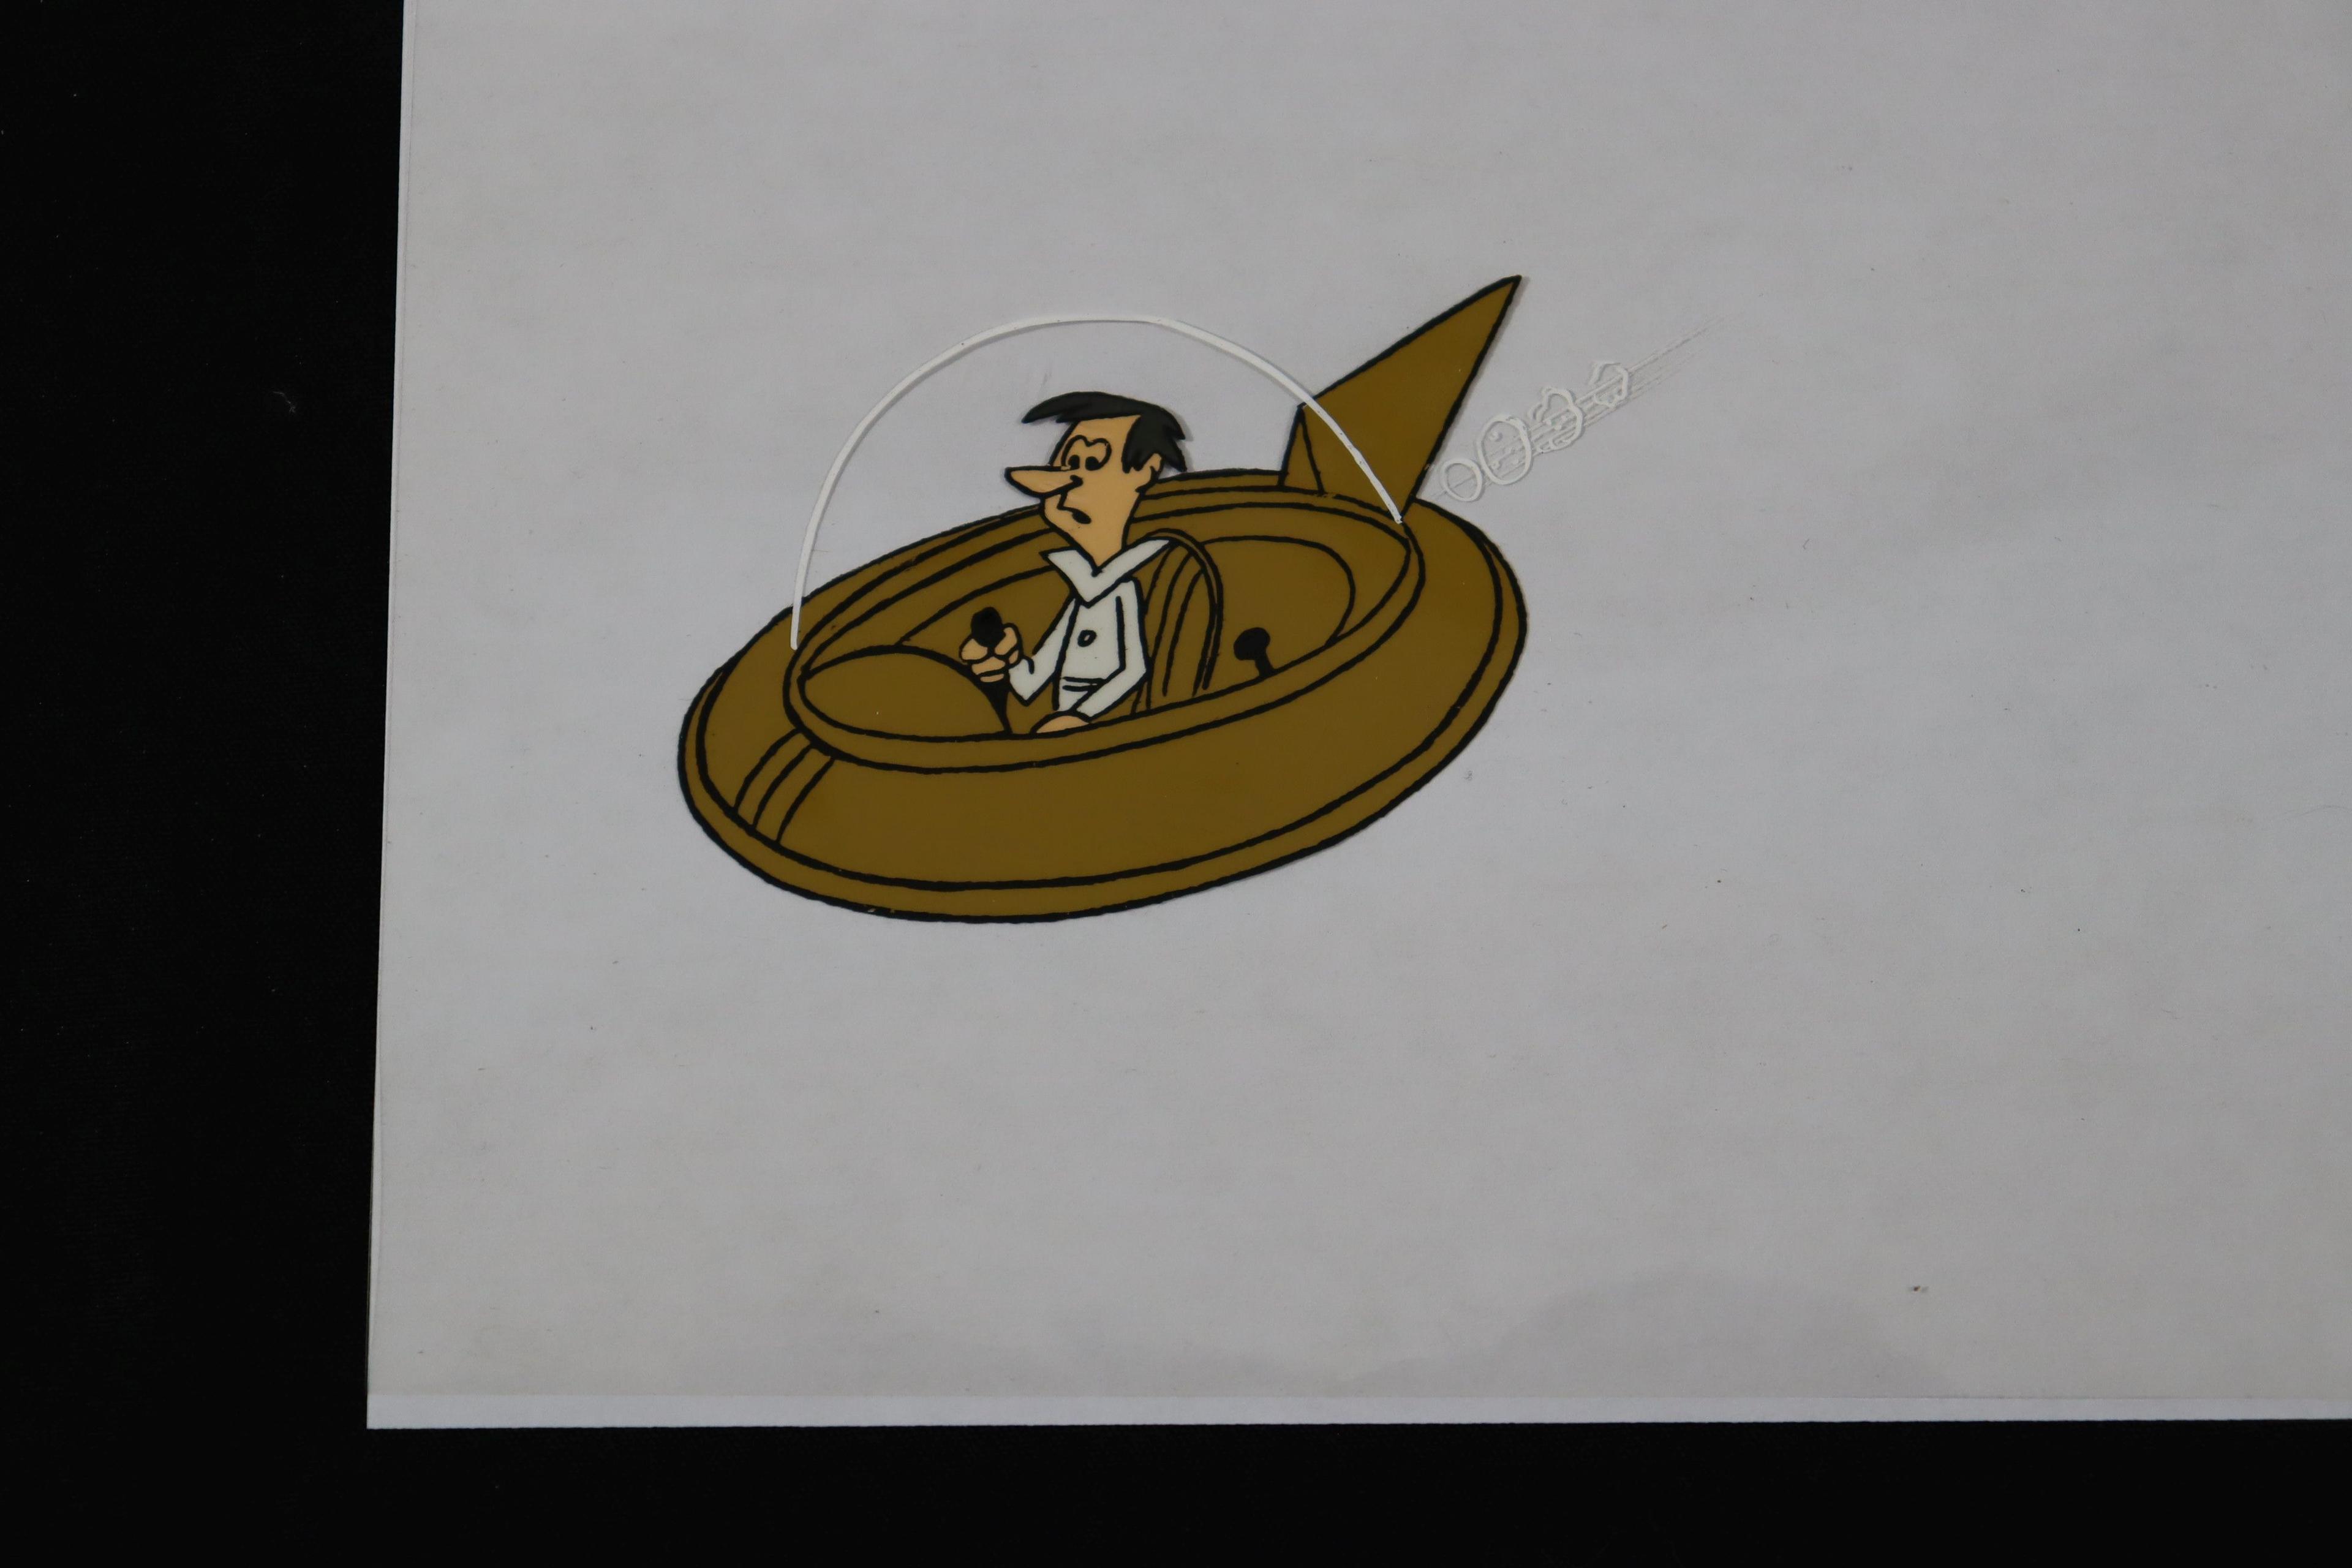 Jetsons/George Jetson Animation Cell